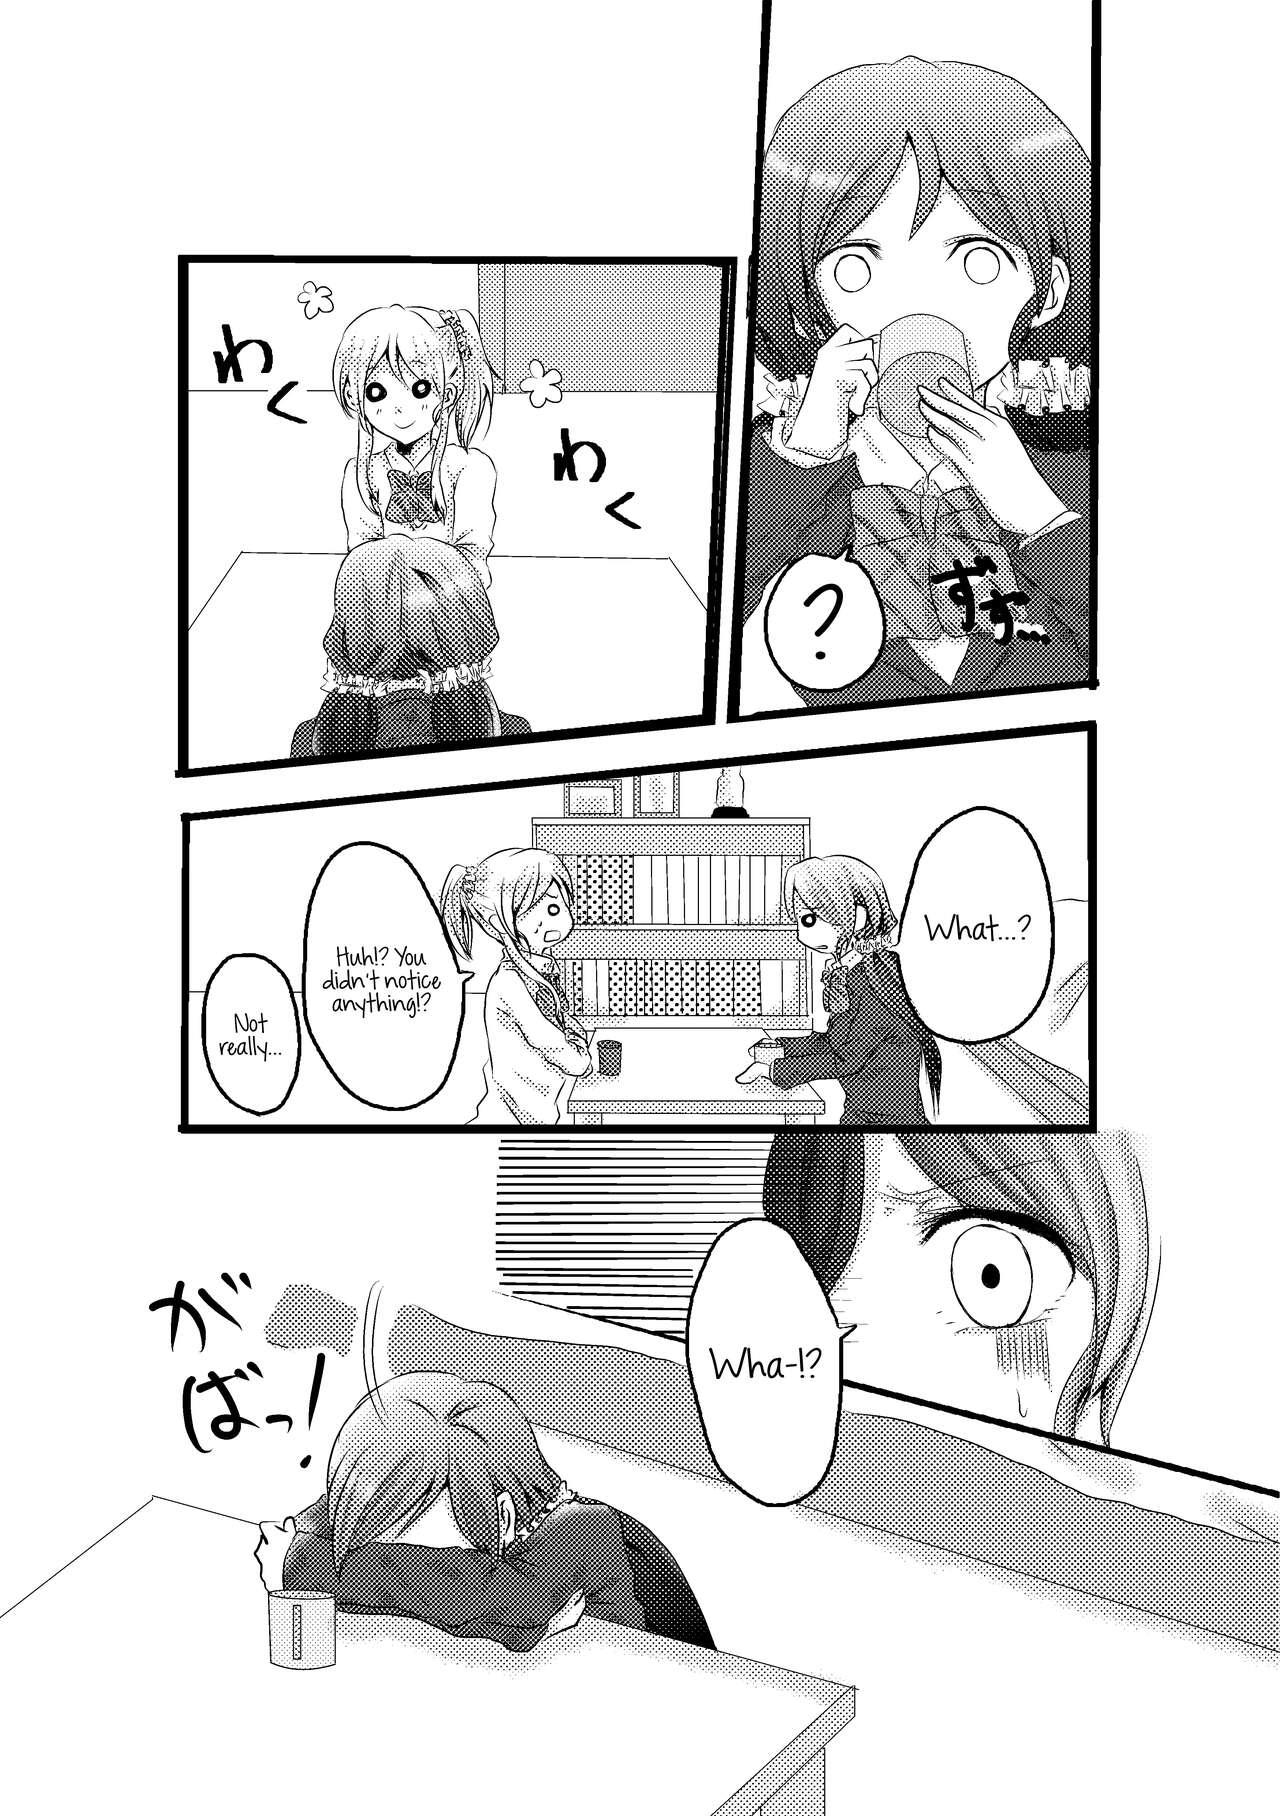 Dorm [Inugoya (Toshiko)] A story about mischievous Eli-chan and Nozomi-chan (Umi no Shinwa) (Love Live!) [English] [Usr32] [Digital] - Love live Peluda - Picture 2